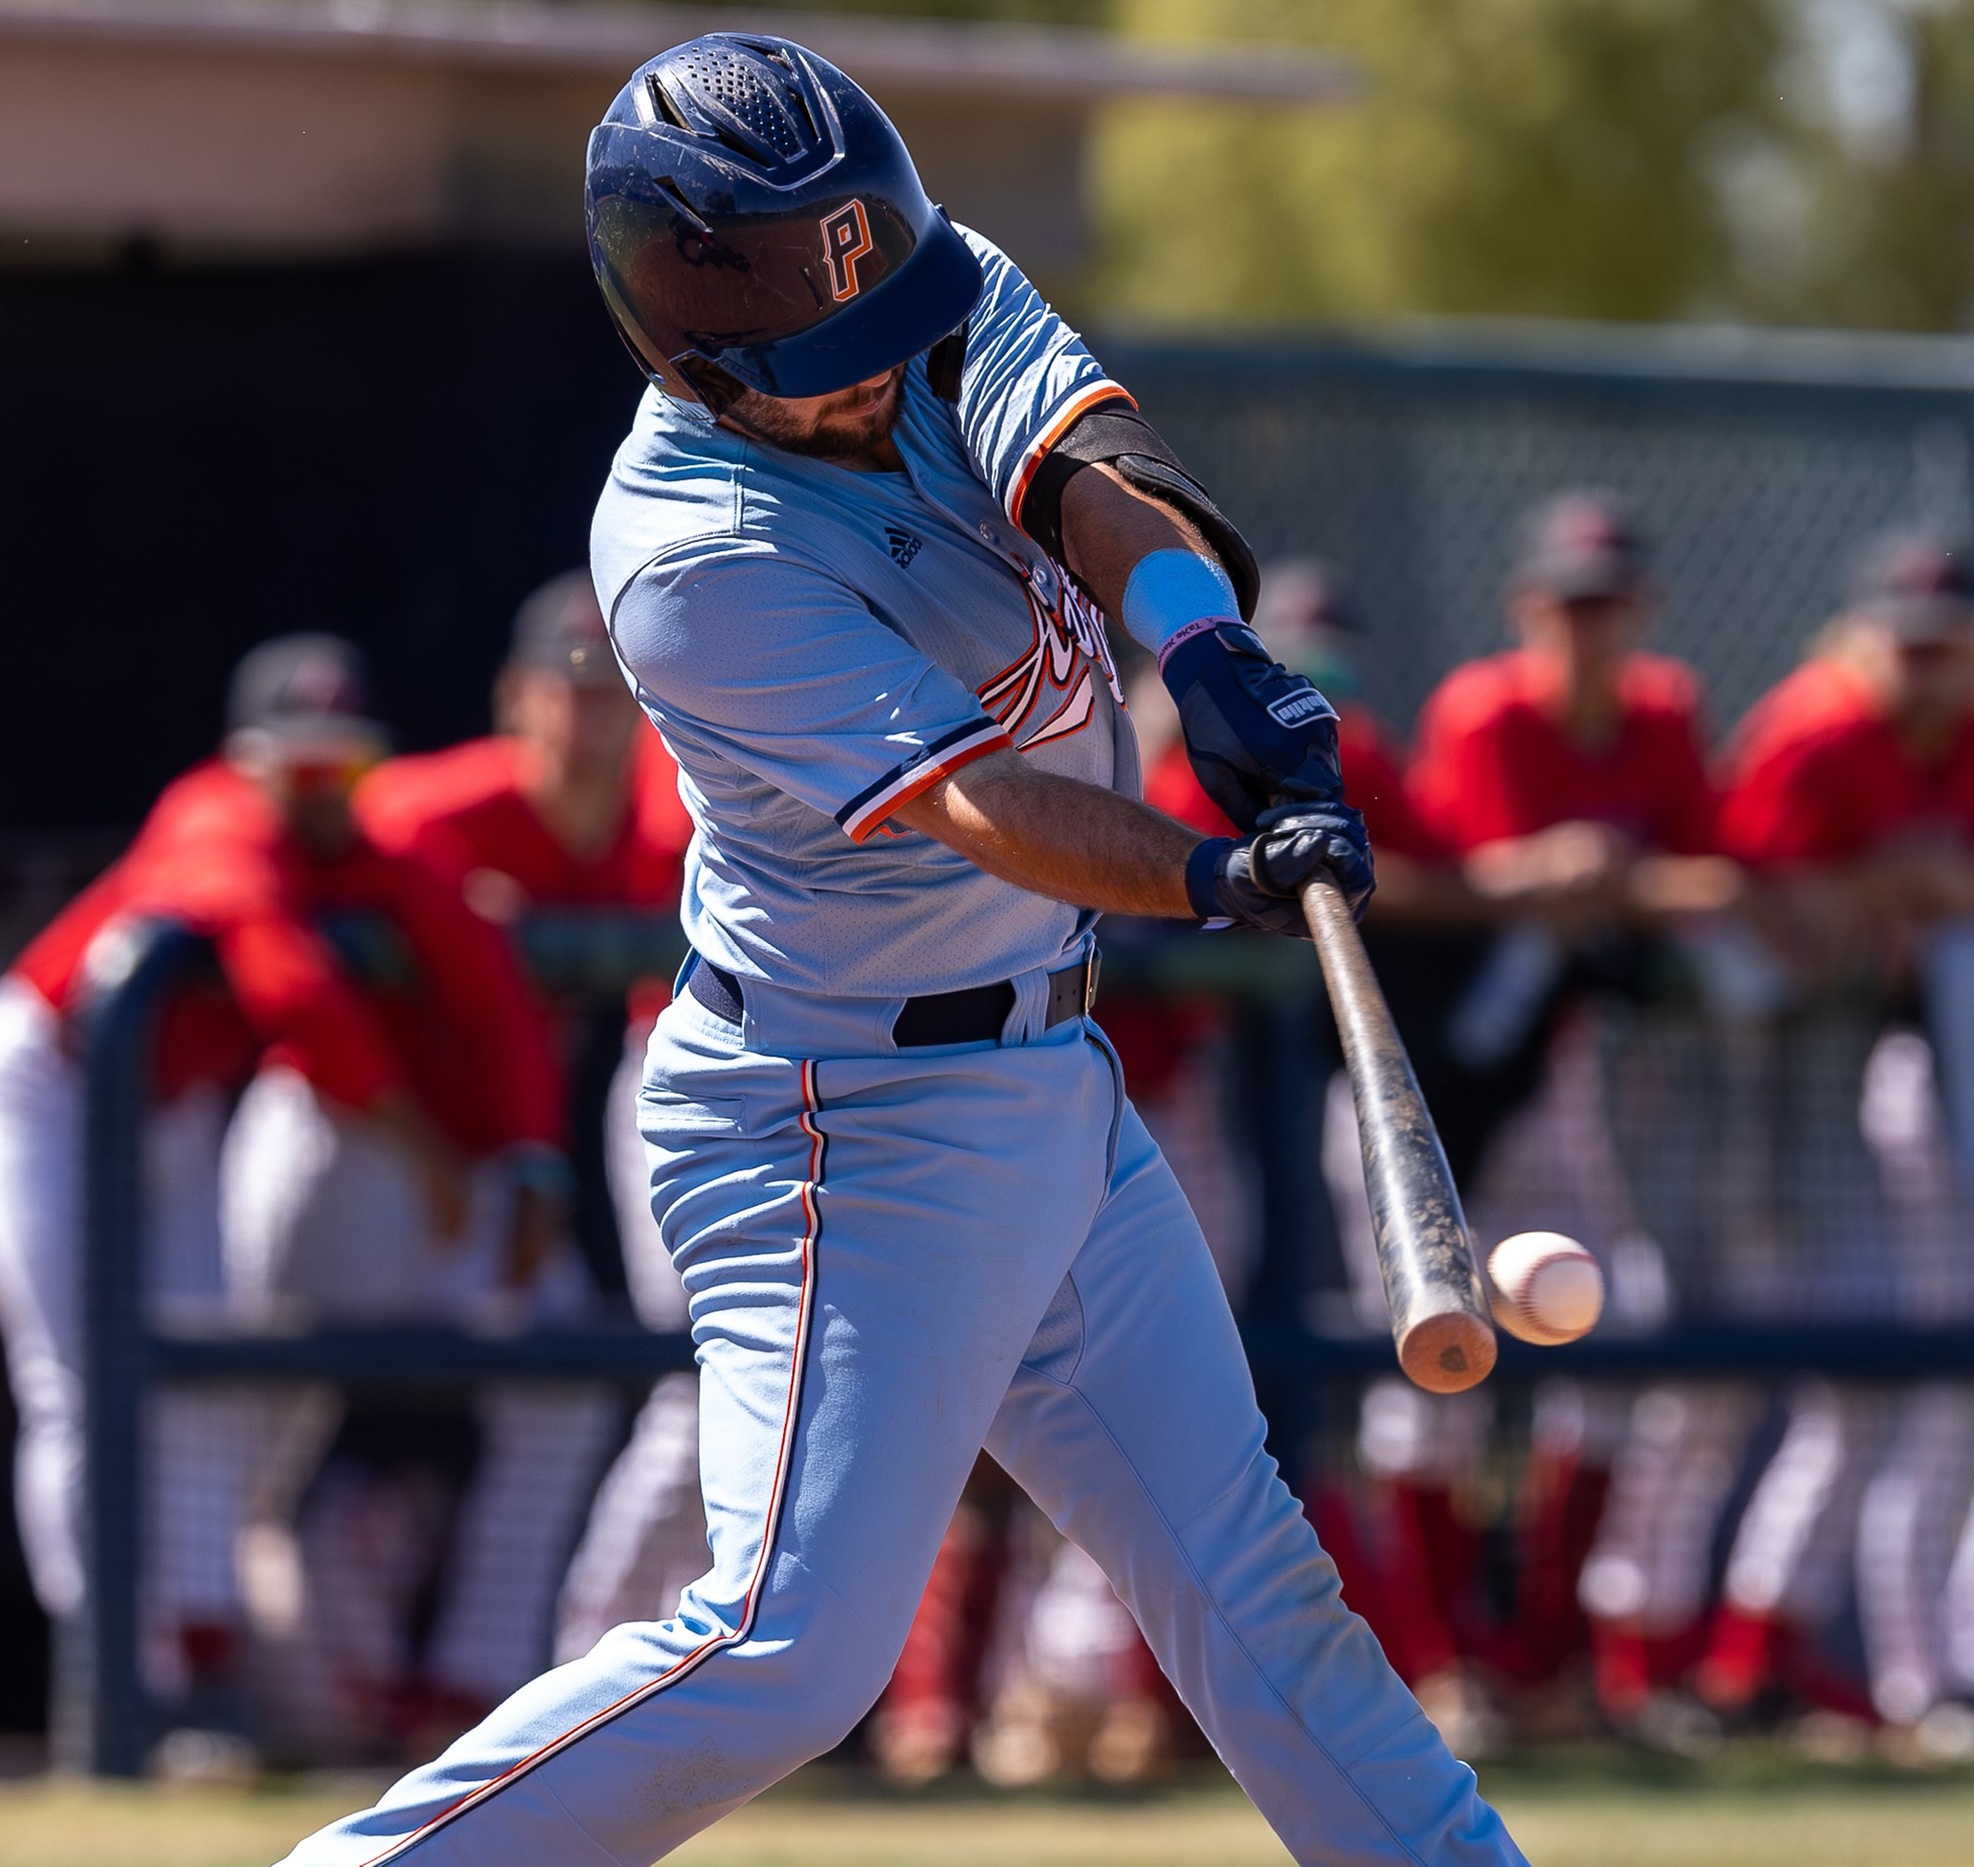 Sophomore Caleb Herd (Cienega HS) hit a two-run home run in the 6th inning to put the Aztecs ahead but Pima fell in the end 7-5 to the College of Southern Nevada in the opening game of the NJCAA West District Tournament.- Herd went 1 for 3 with two RBIs and a run scored. The Aztecs play in an elimination game on Friday at 9:00 a.m. at south Mountain Community College. Photo by Gilbert Alcaraz